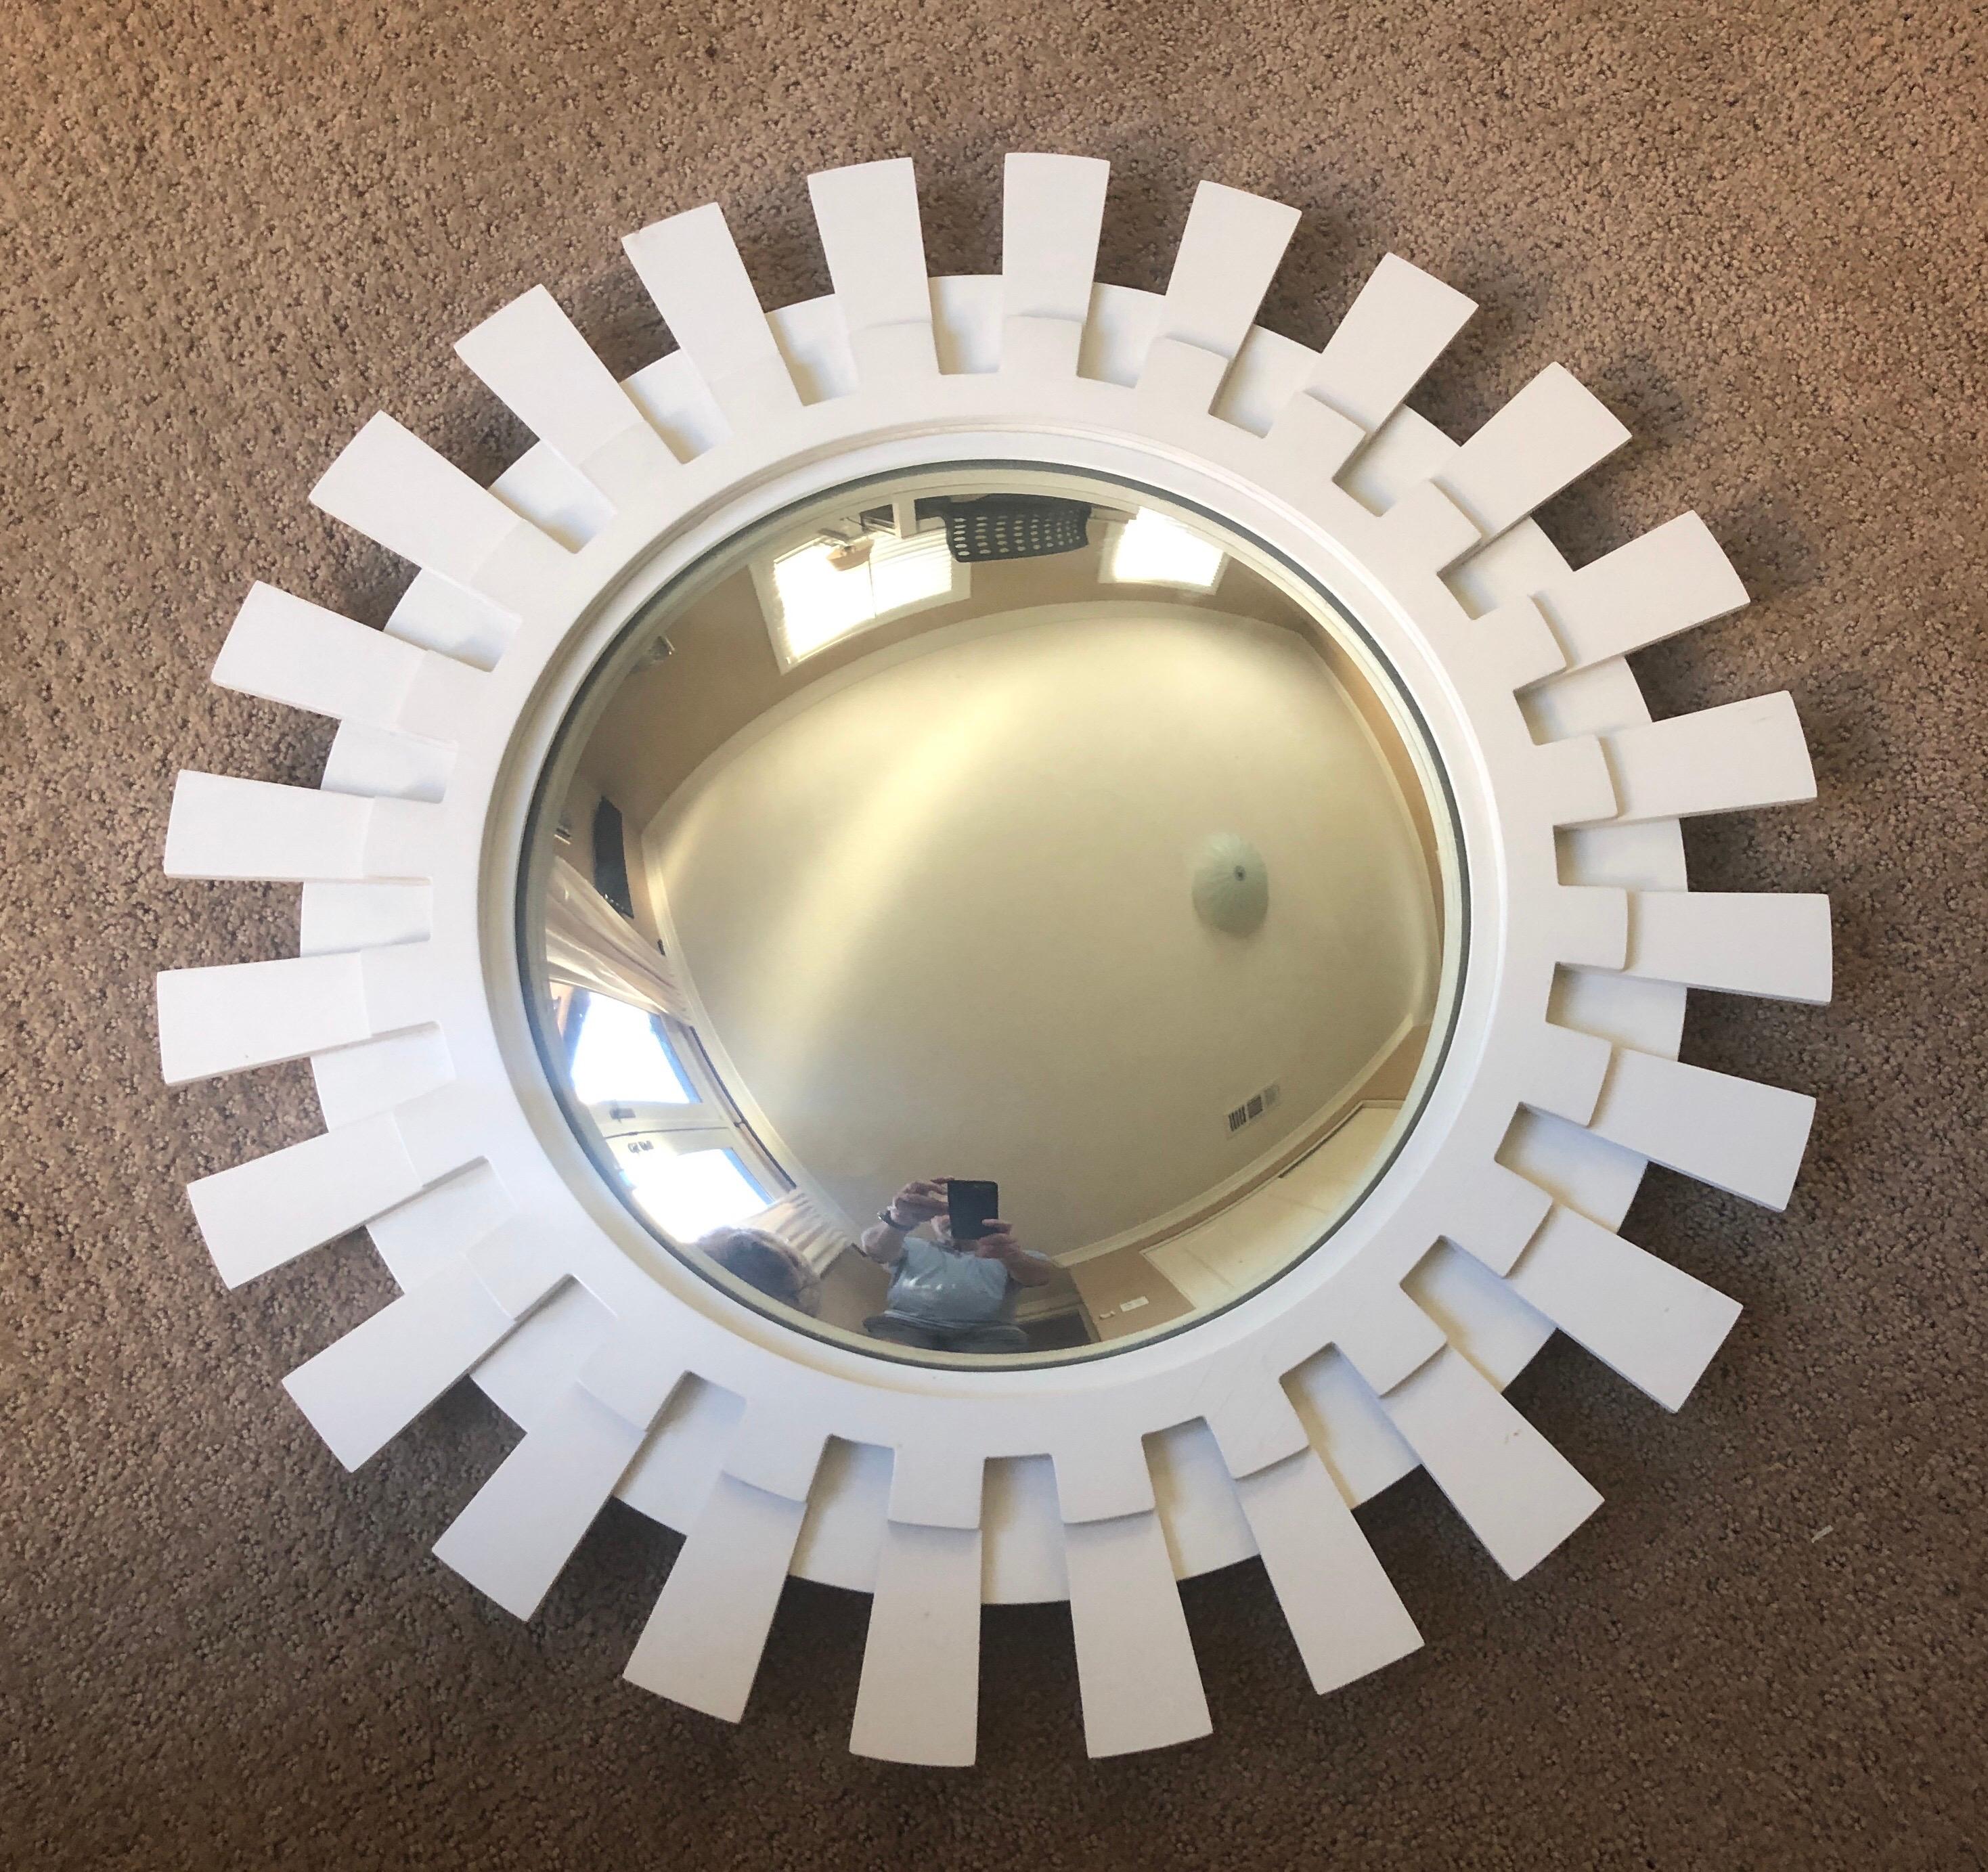 Unique white starburst mirror with convexed glass by Baker Furniture, circa 2000s. The mirror measures 24.75